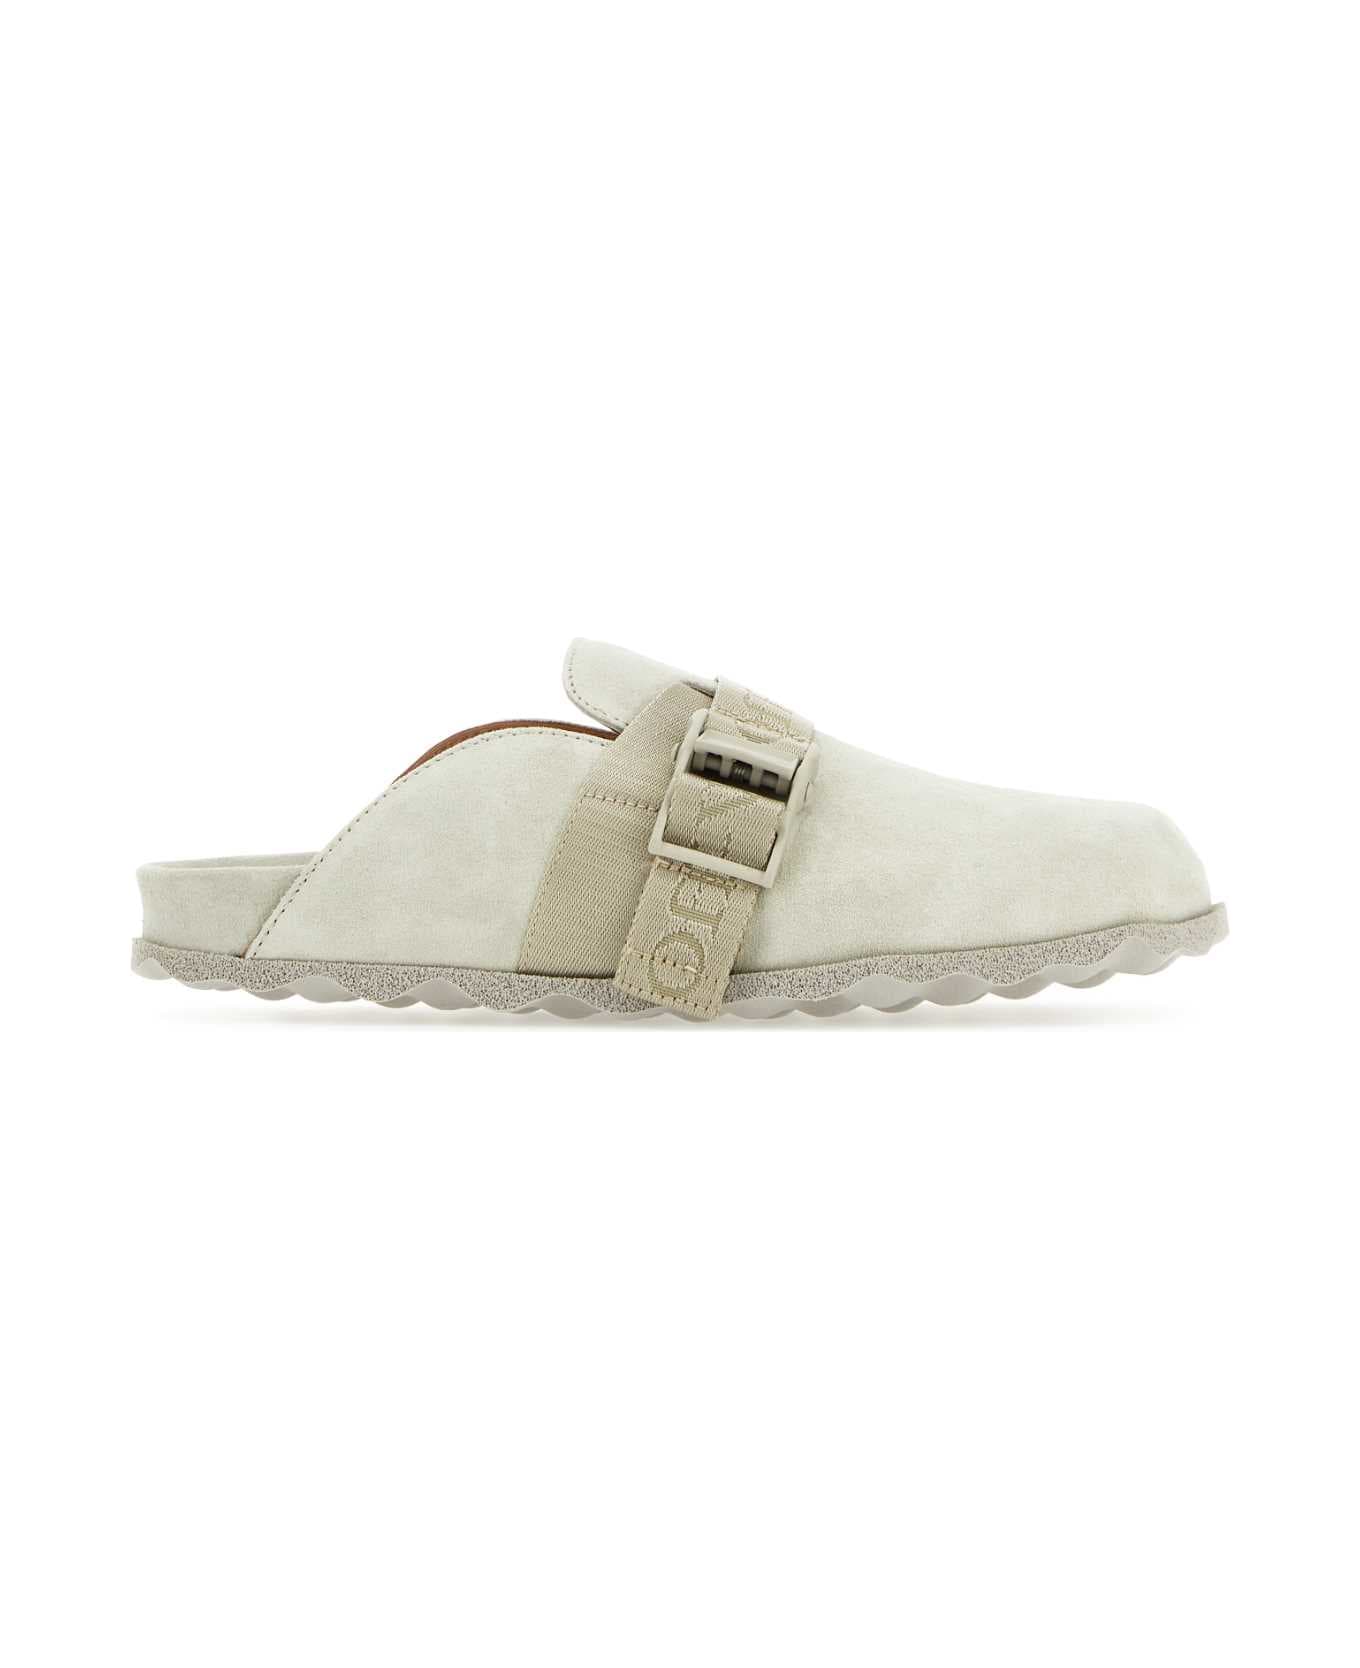 Off-White Suede Slippers - OFFWHITE サンダル